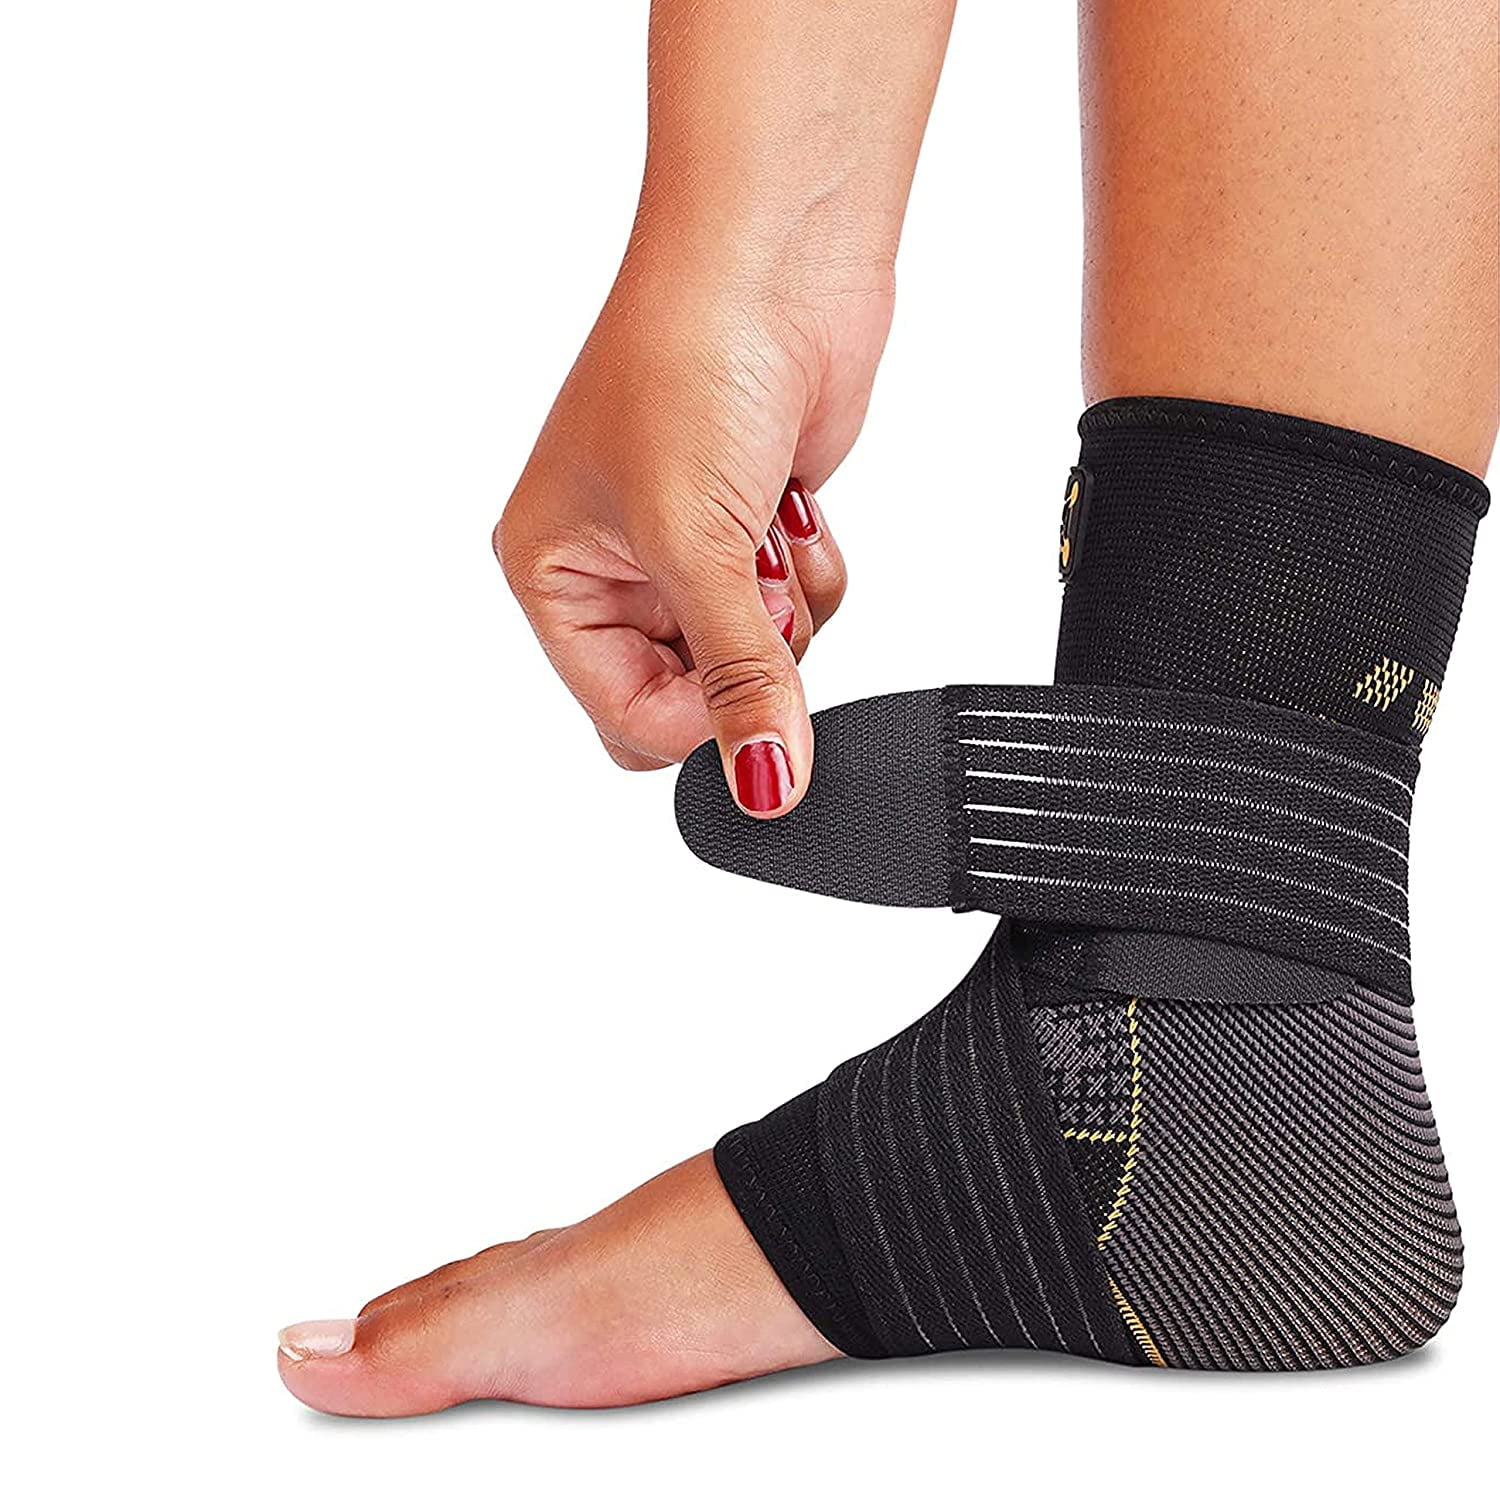 Ankle Brace for Women and Men - Adjustable Strap for Arch Support ...